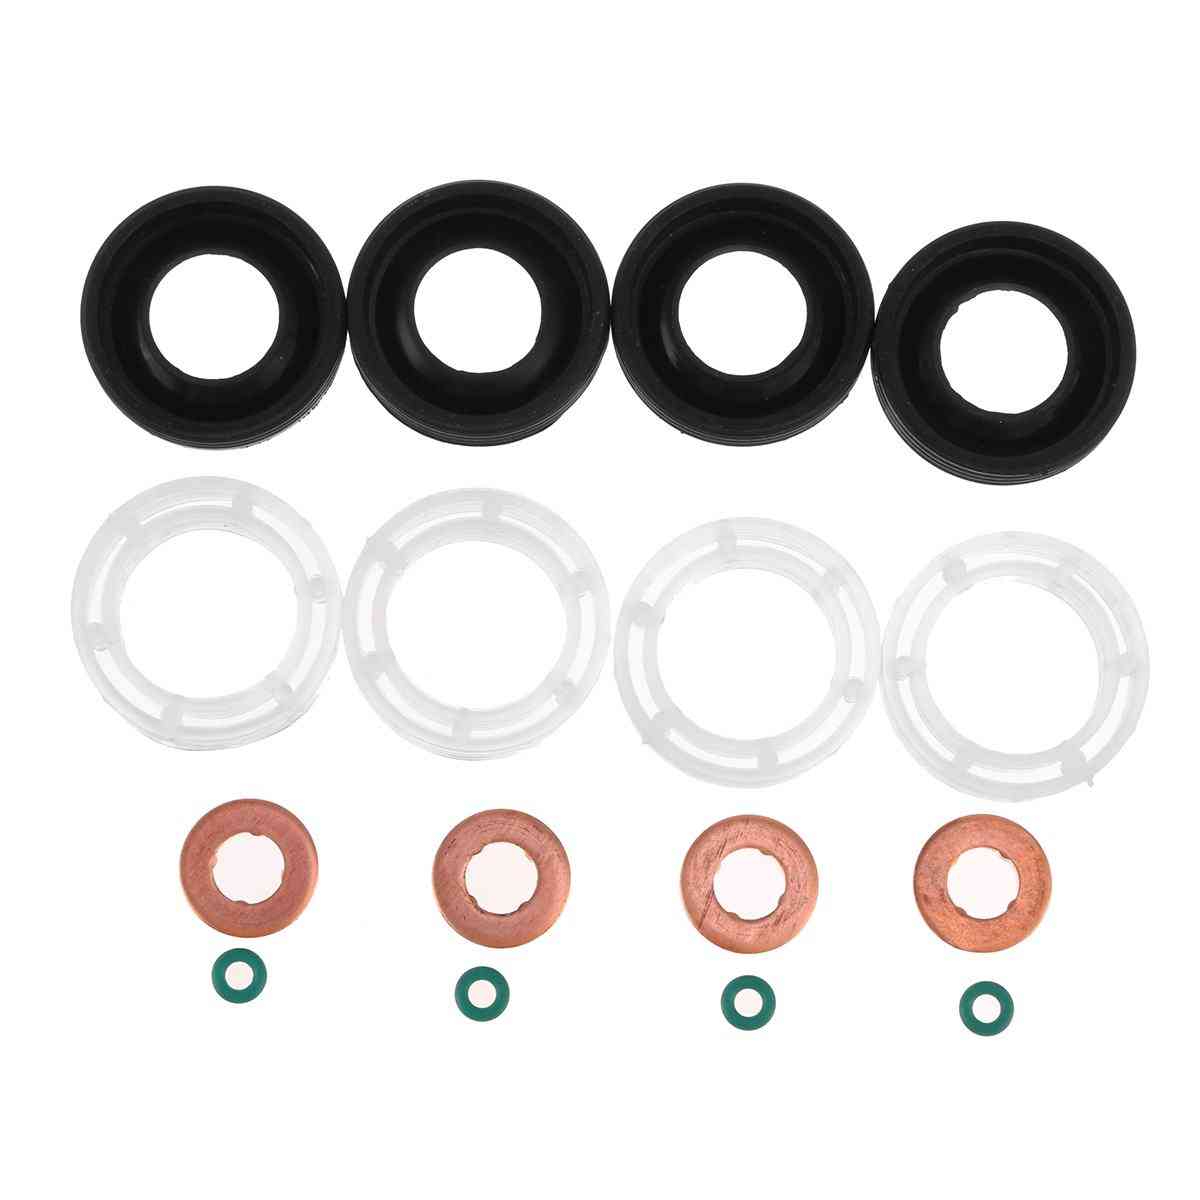 Fuel Injector Seal+protectors+washer+o-ring For Peugeot 207/ 307/ 407 1.6 Hdi 2004 Car 198299